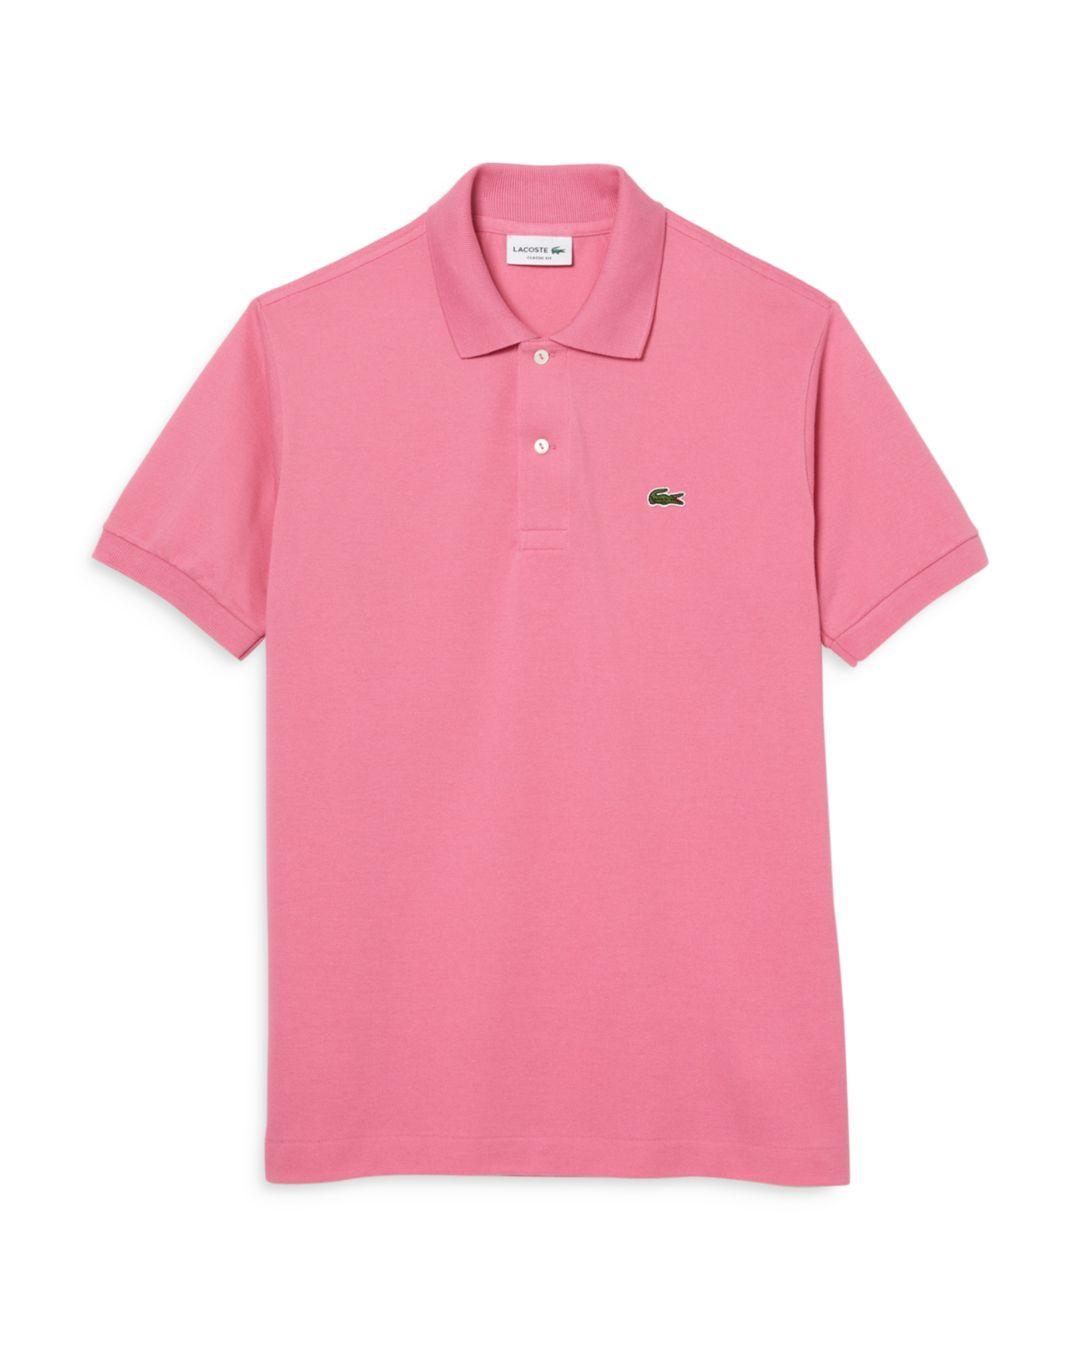 Lacoste Classic Cotton Piqué Fashion Polo Shirt in Pink for Men | Lyst